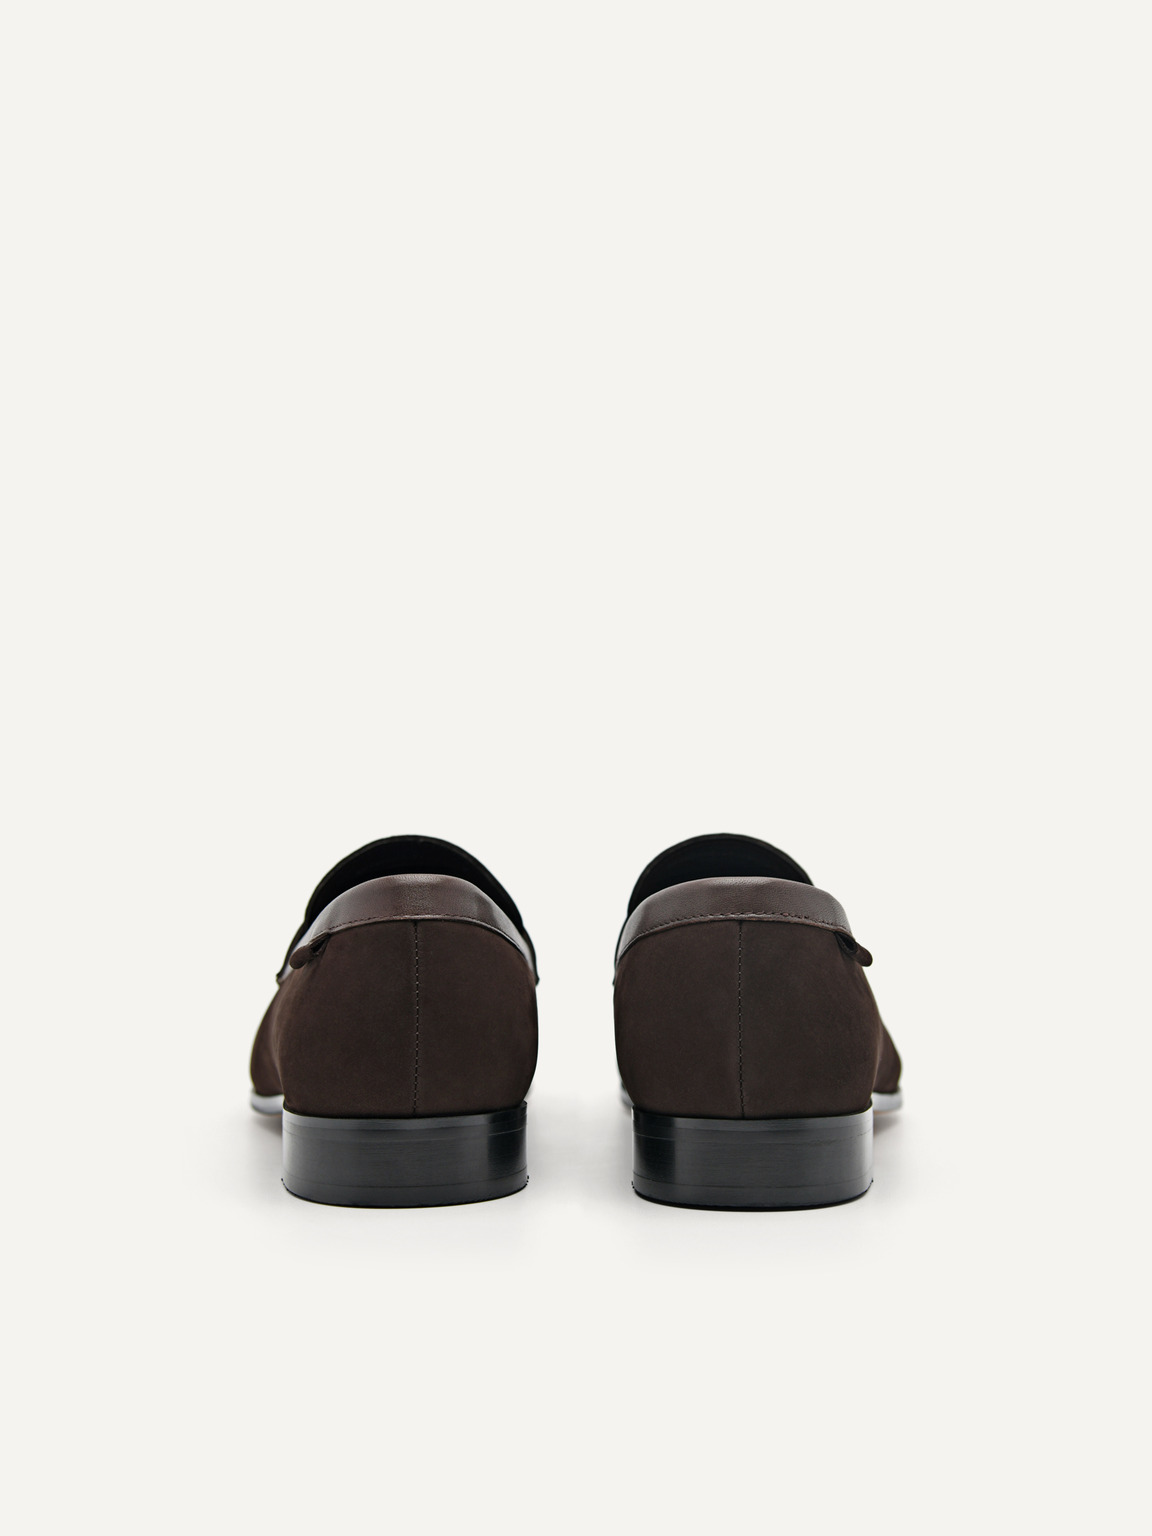 Firth Leather Loafers, Dark Brown